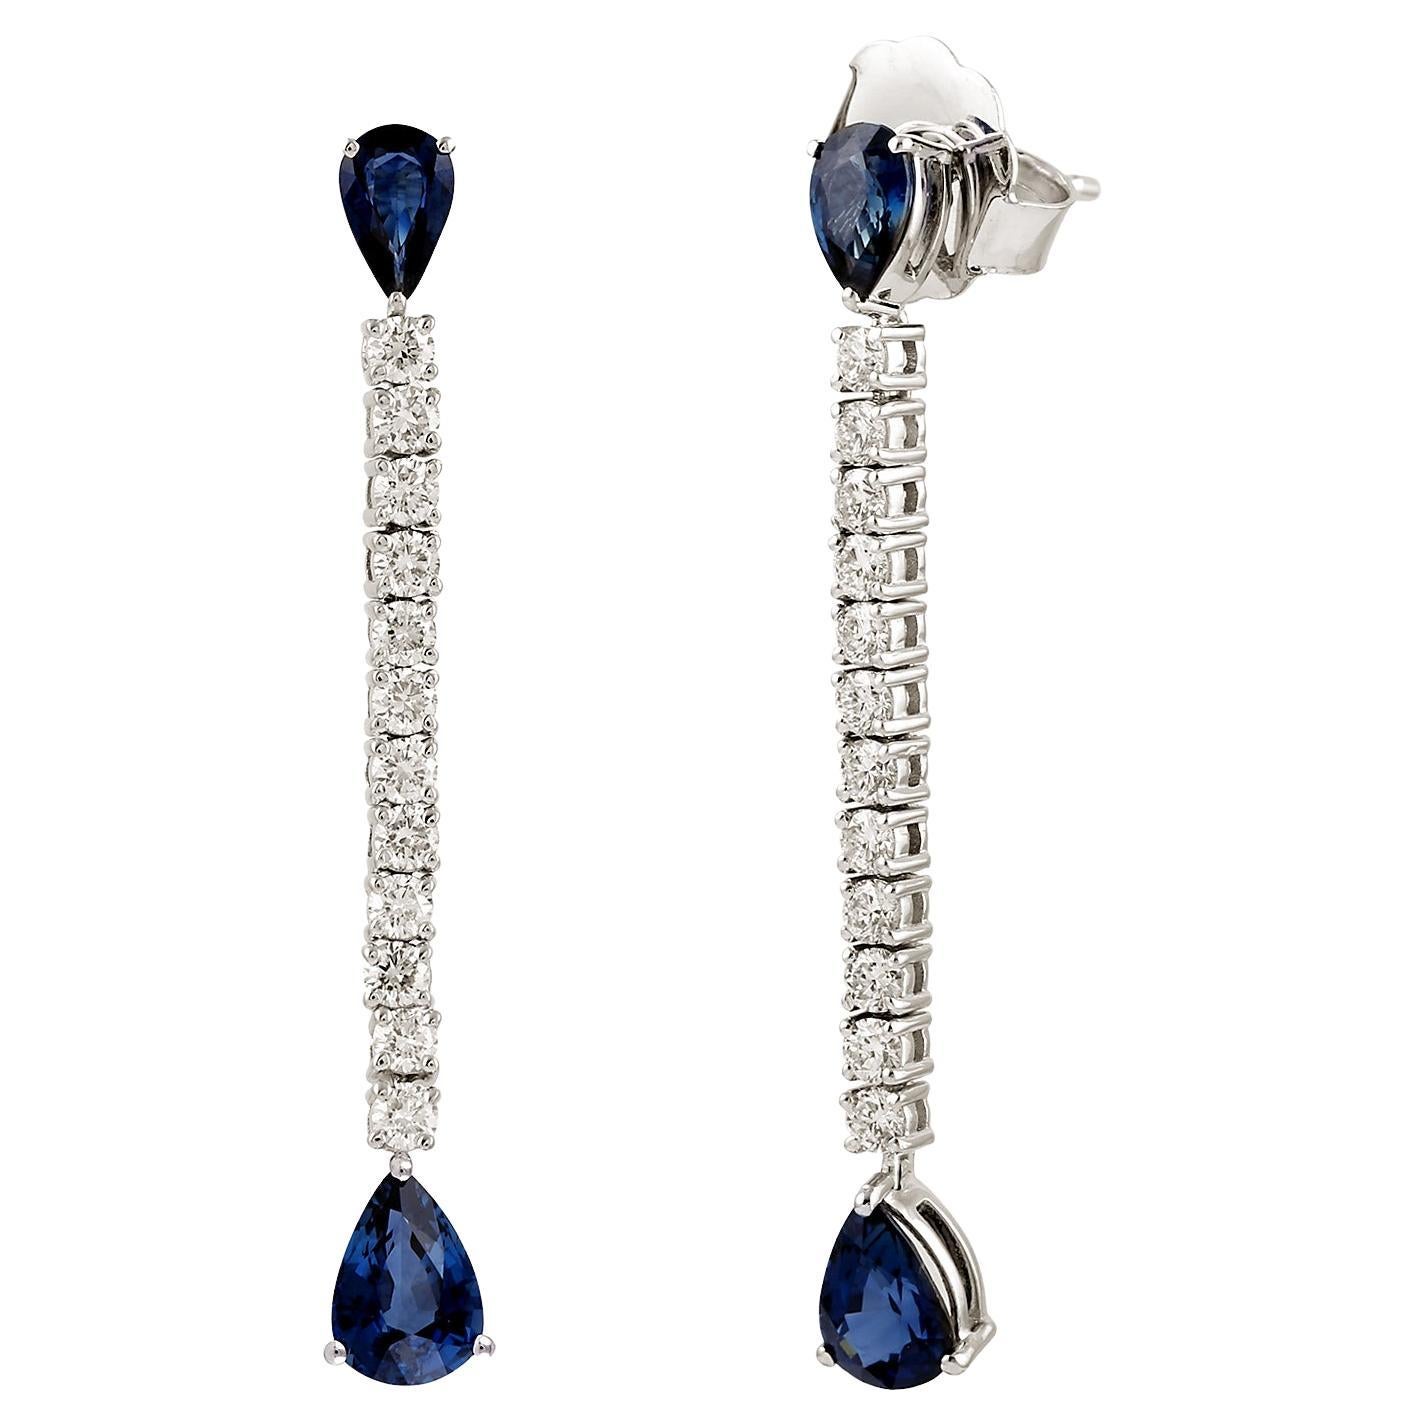 Pear Shaped Blue Sapphire Chain Earrings With Diamonds Made In 18k Gold For Sale